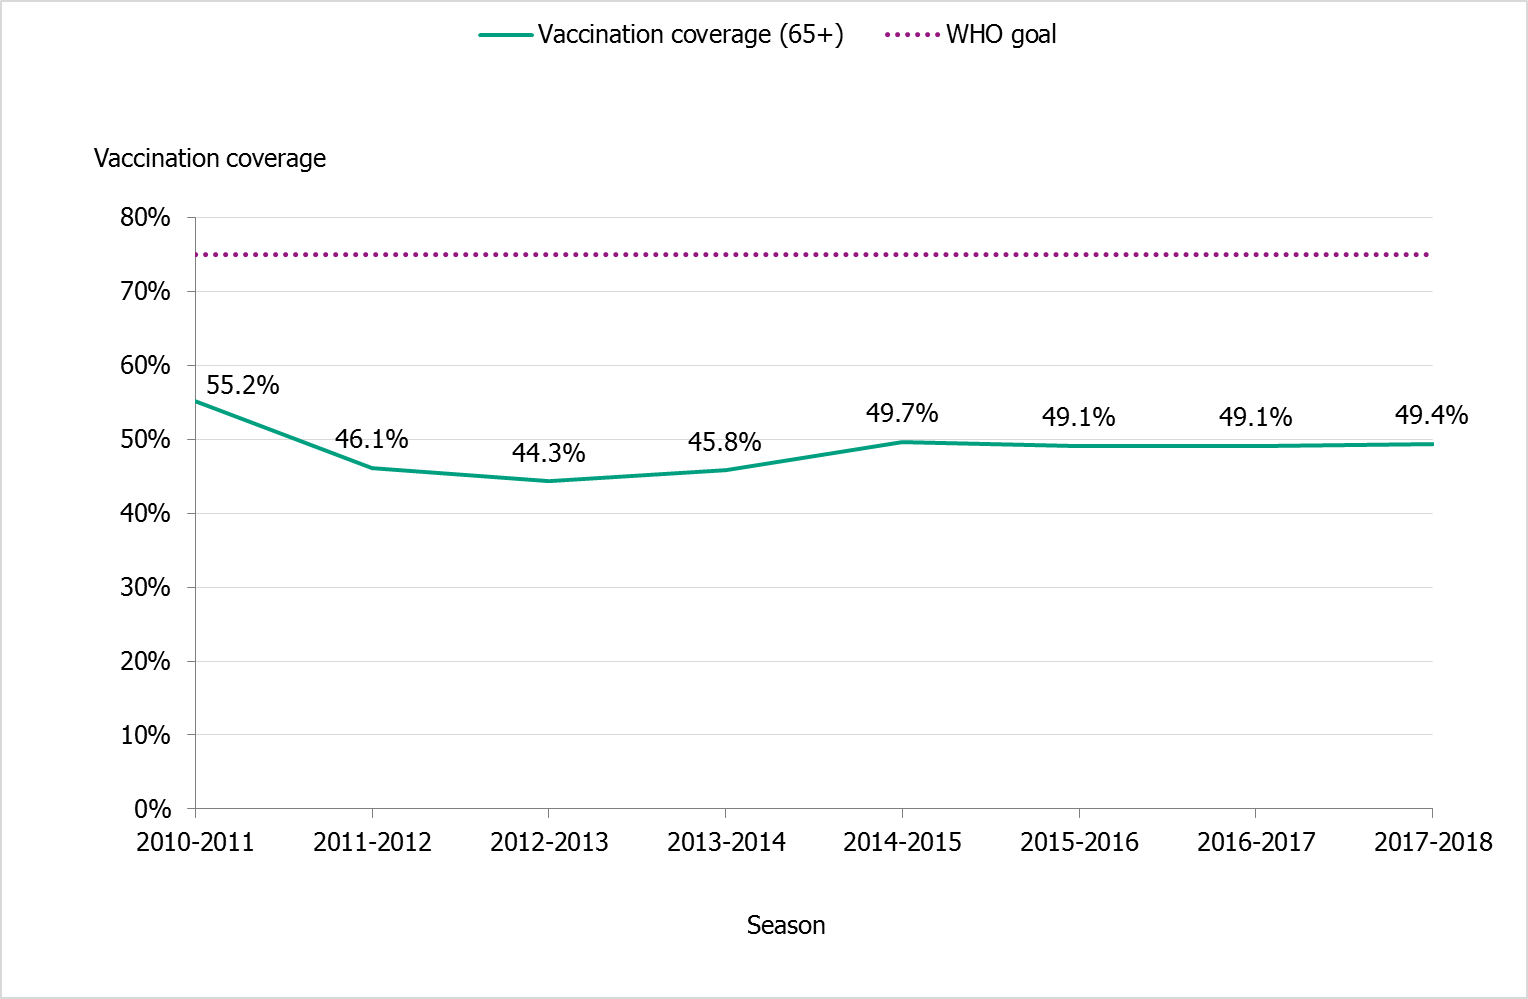 Vaccination coverage among those aged 65 and older in Sweden, 8 seasons. For the past four seasons, the coverage hovers at 49 to 50%. THe highest coverage is seen in 2010-2011 at 55.2%, followed by a dip to 44.3% in 2012-2013. 